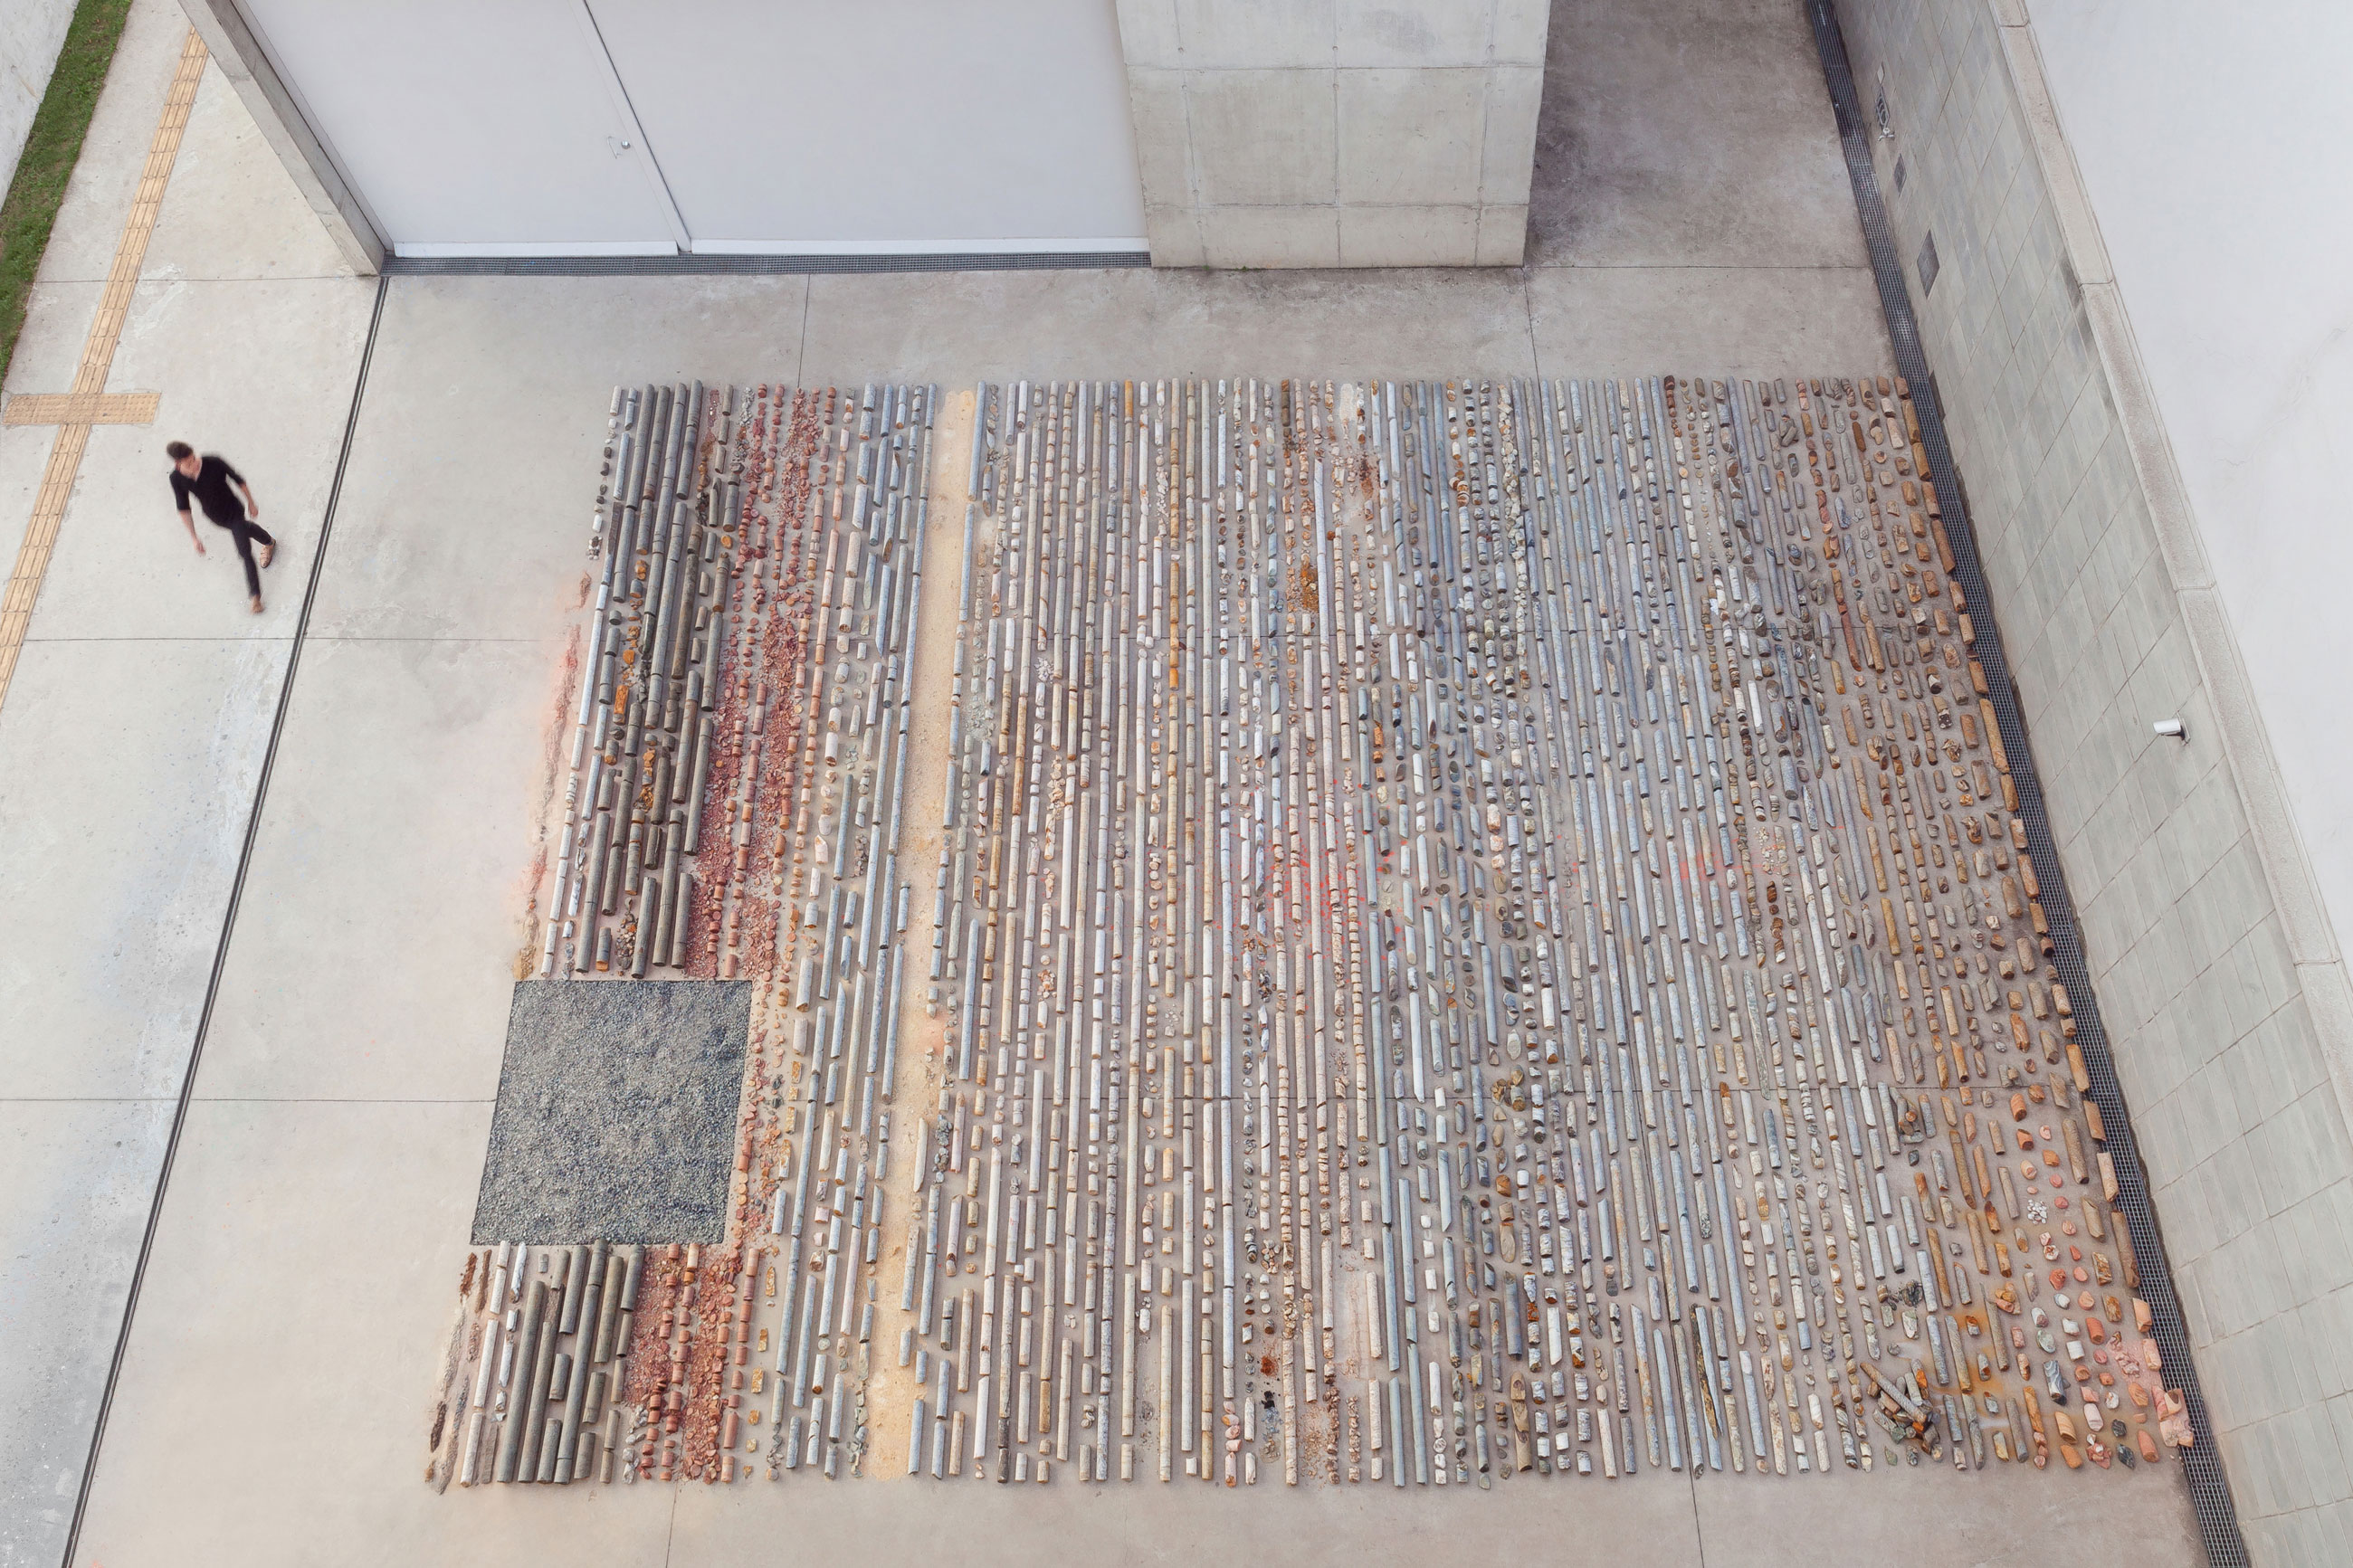 Site-specific Installation titled testemunho by artist Daniel de Paula, consisting of rock core samples, earth and diagram, curated by Bruno Alves de Almeida for the project SITU at Galeria Leme, São Paulo, Brazil.